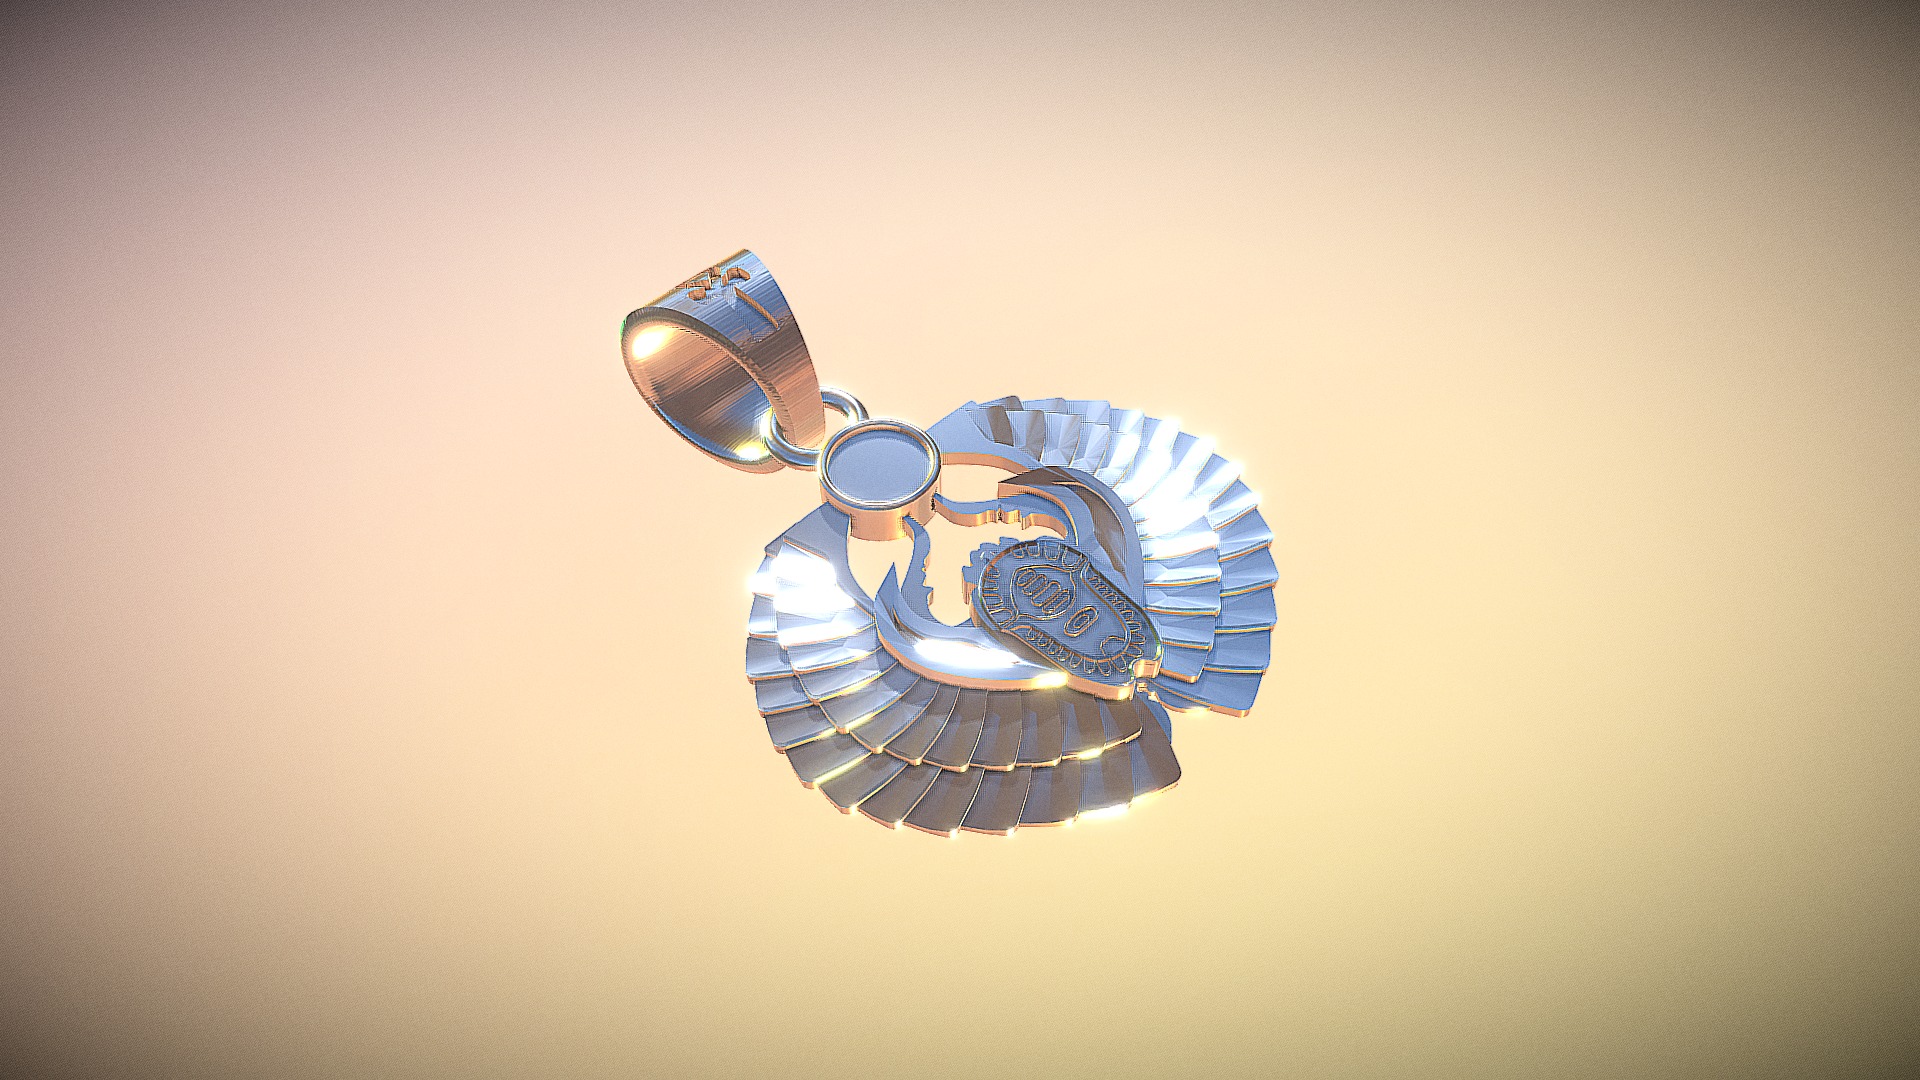 3D model Jewelery – scarabeus - This is a 3D model of the Jewelery - scarabeus. The 3D model is about a circular object with a light on it.